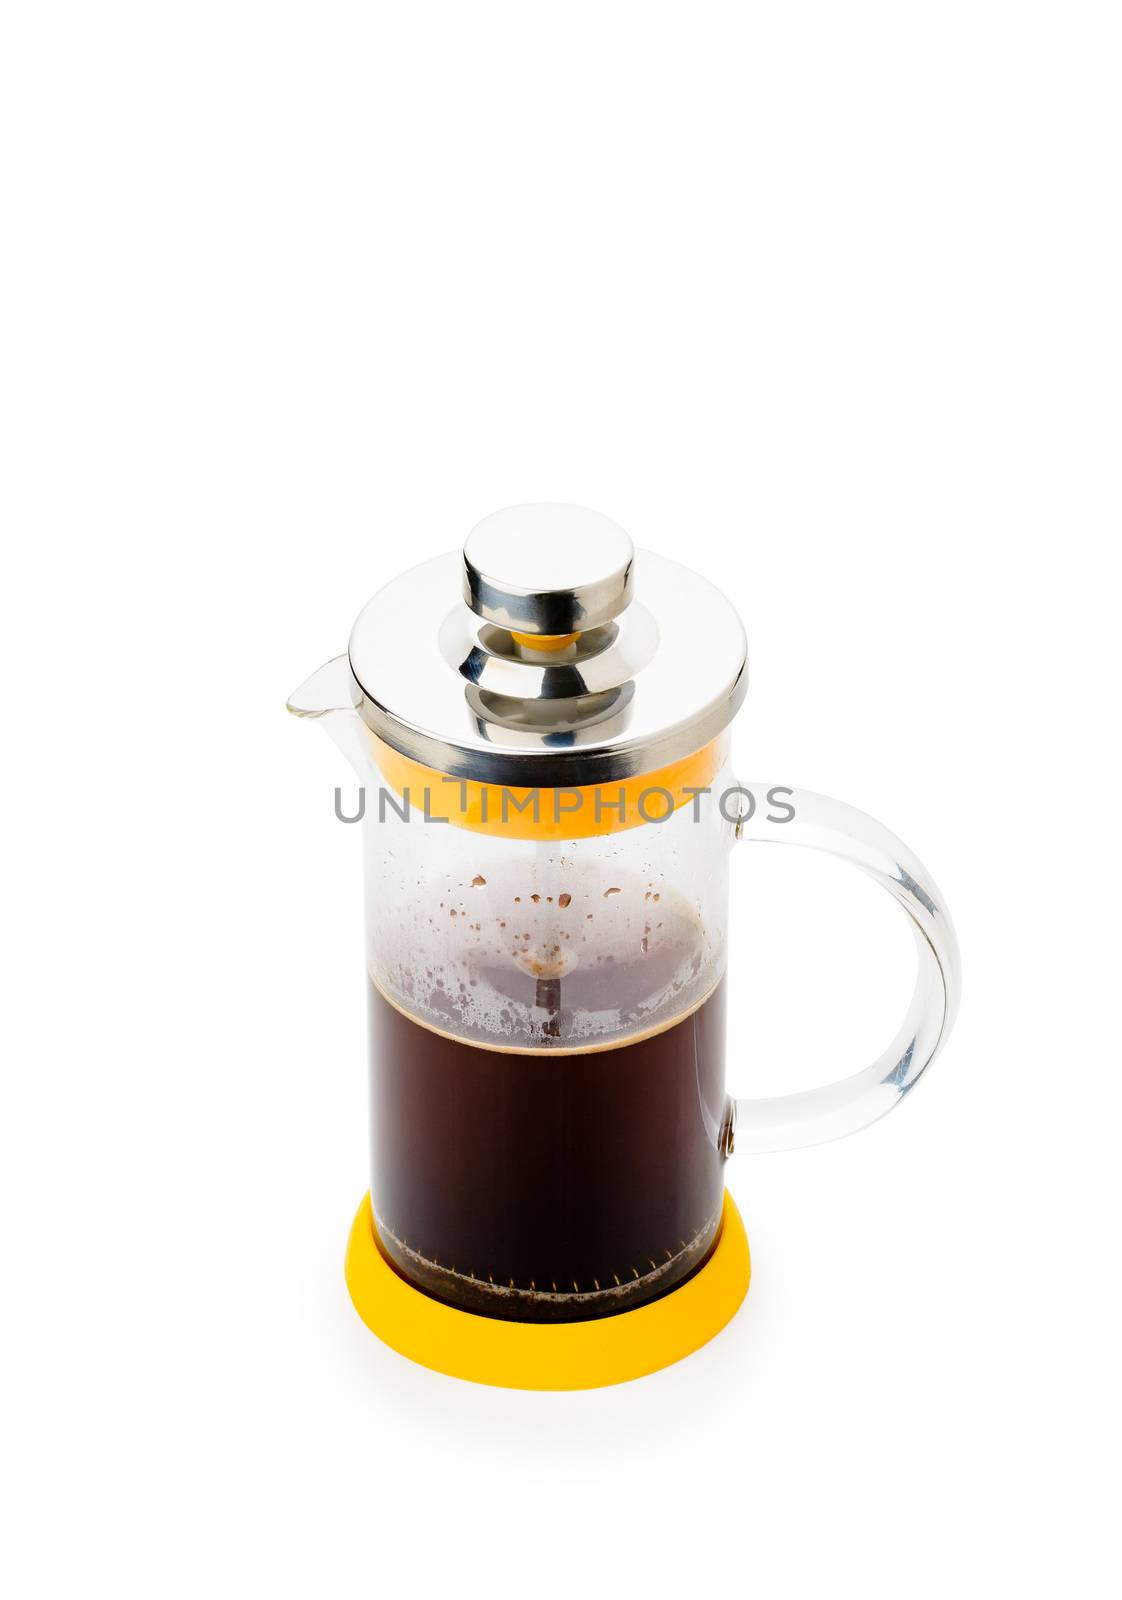 Half full glass French press for coffee and tea, isolated on white background